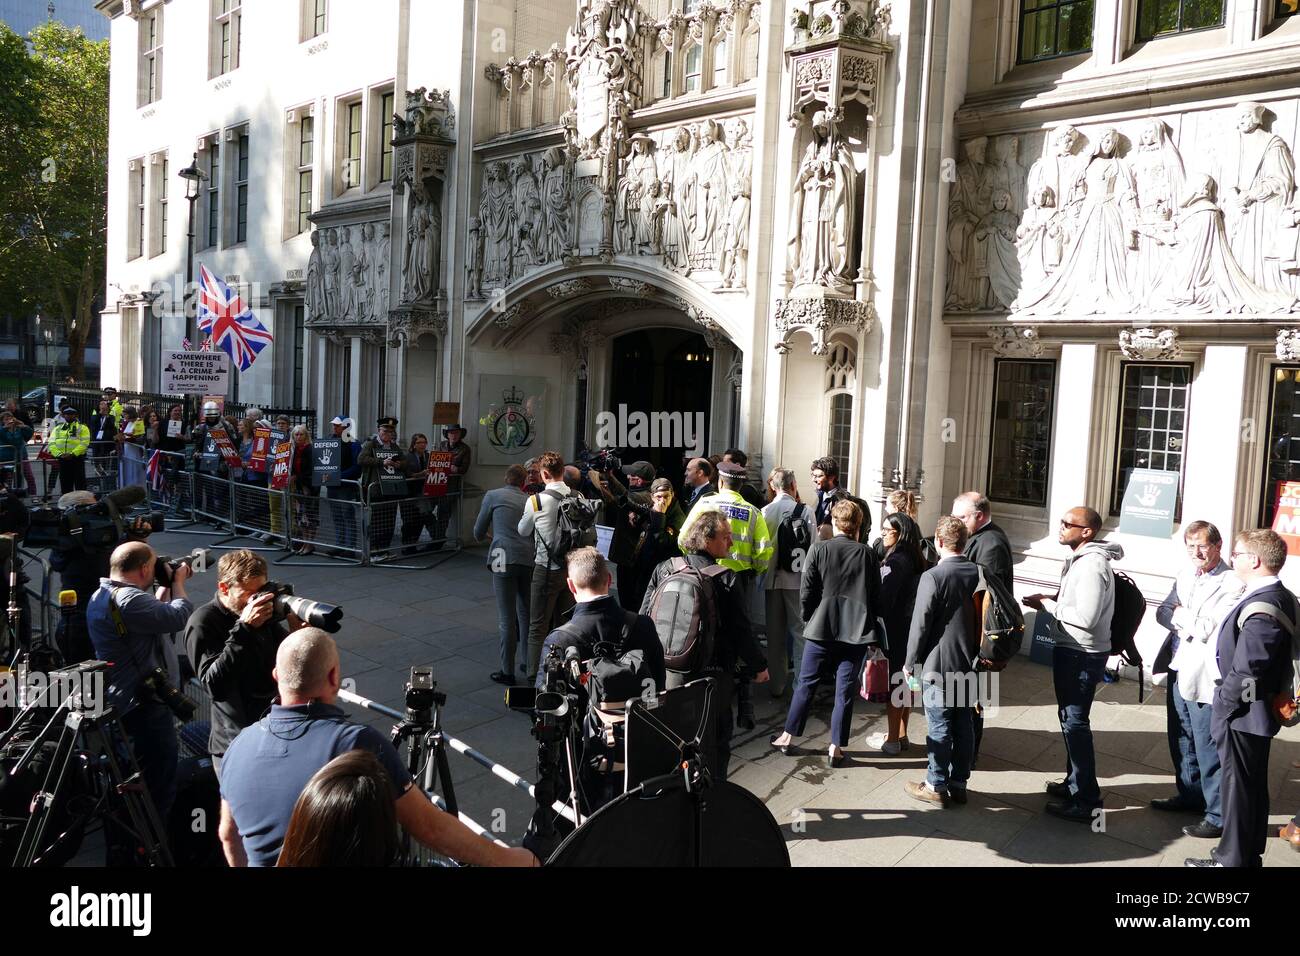 Remain' supporters at the Supreme Court, on the first day of the hearing on the Prorogation of Parliament. 17th Sept 2019. prorogation of the Parliament of the United Kingdom was ordered by Queen Elizabeth II upon the advice of the Conservative Prime Minister, Boris Johnson, on 28 August 2019. opposition politicians saw this as an unconstitutional attempt to reduce parliamentary scrutiny of the Government's Brexit plan. A decision that the prorogation was unlawful was made by the Supreme Court of the United Kingdom on 24th September 2019. Stock Photo